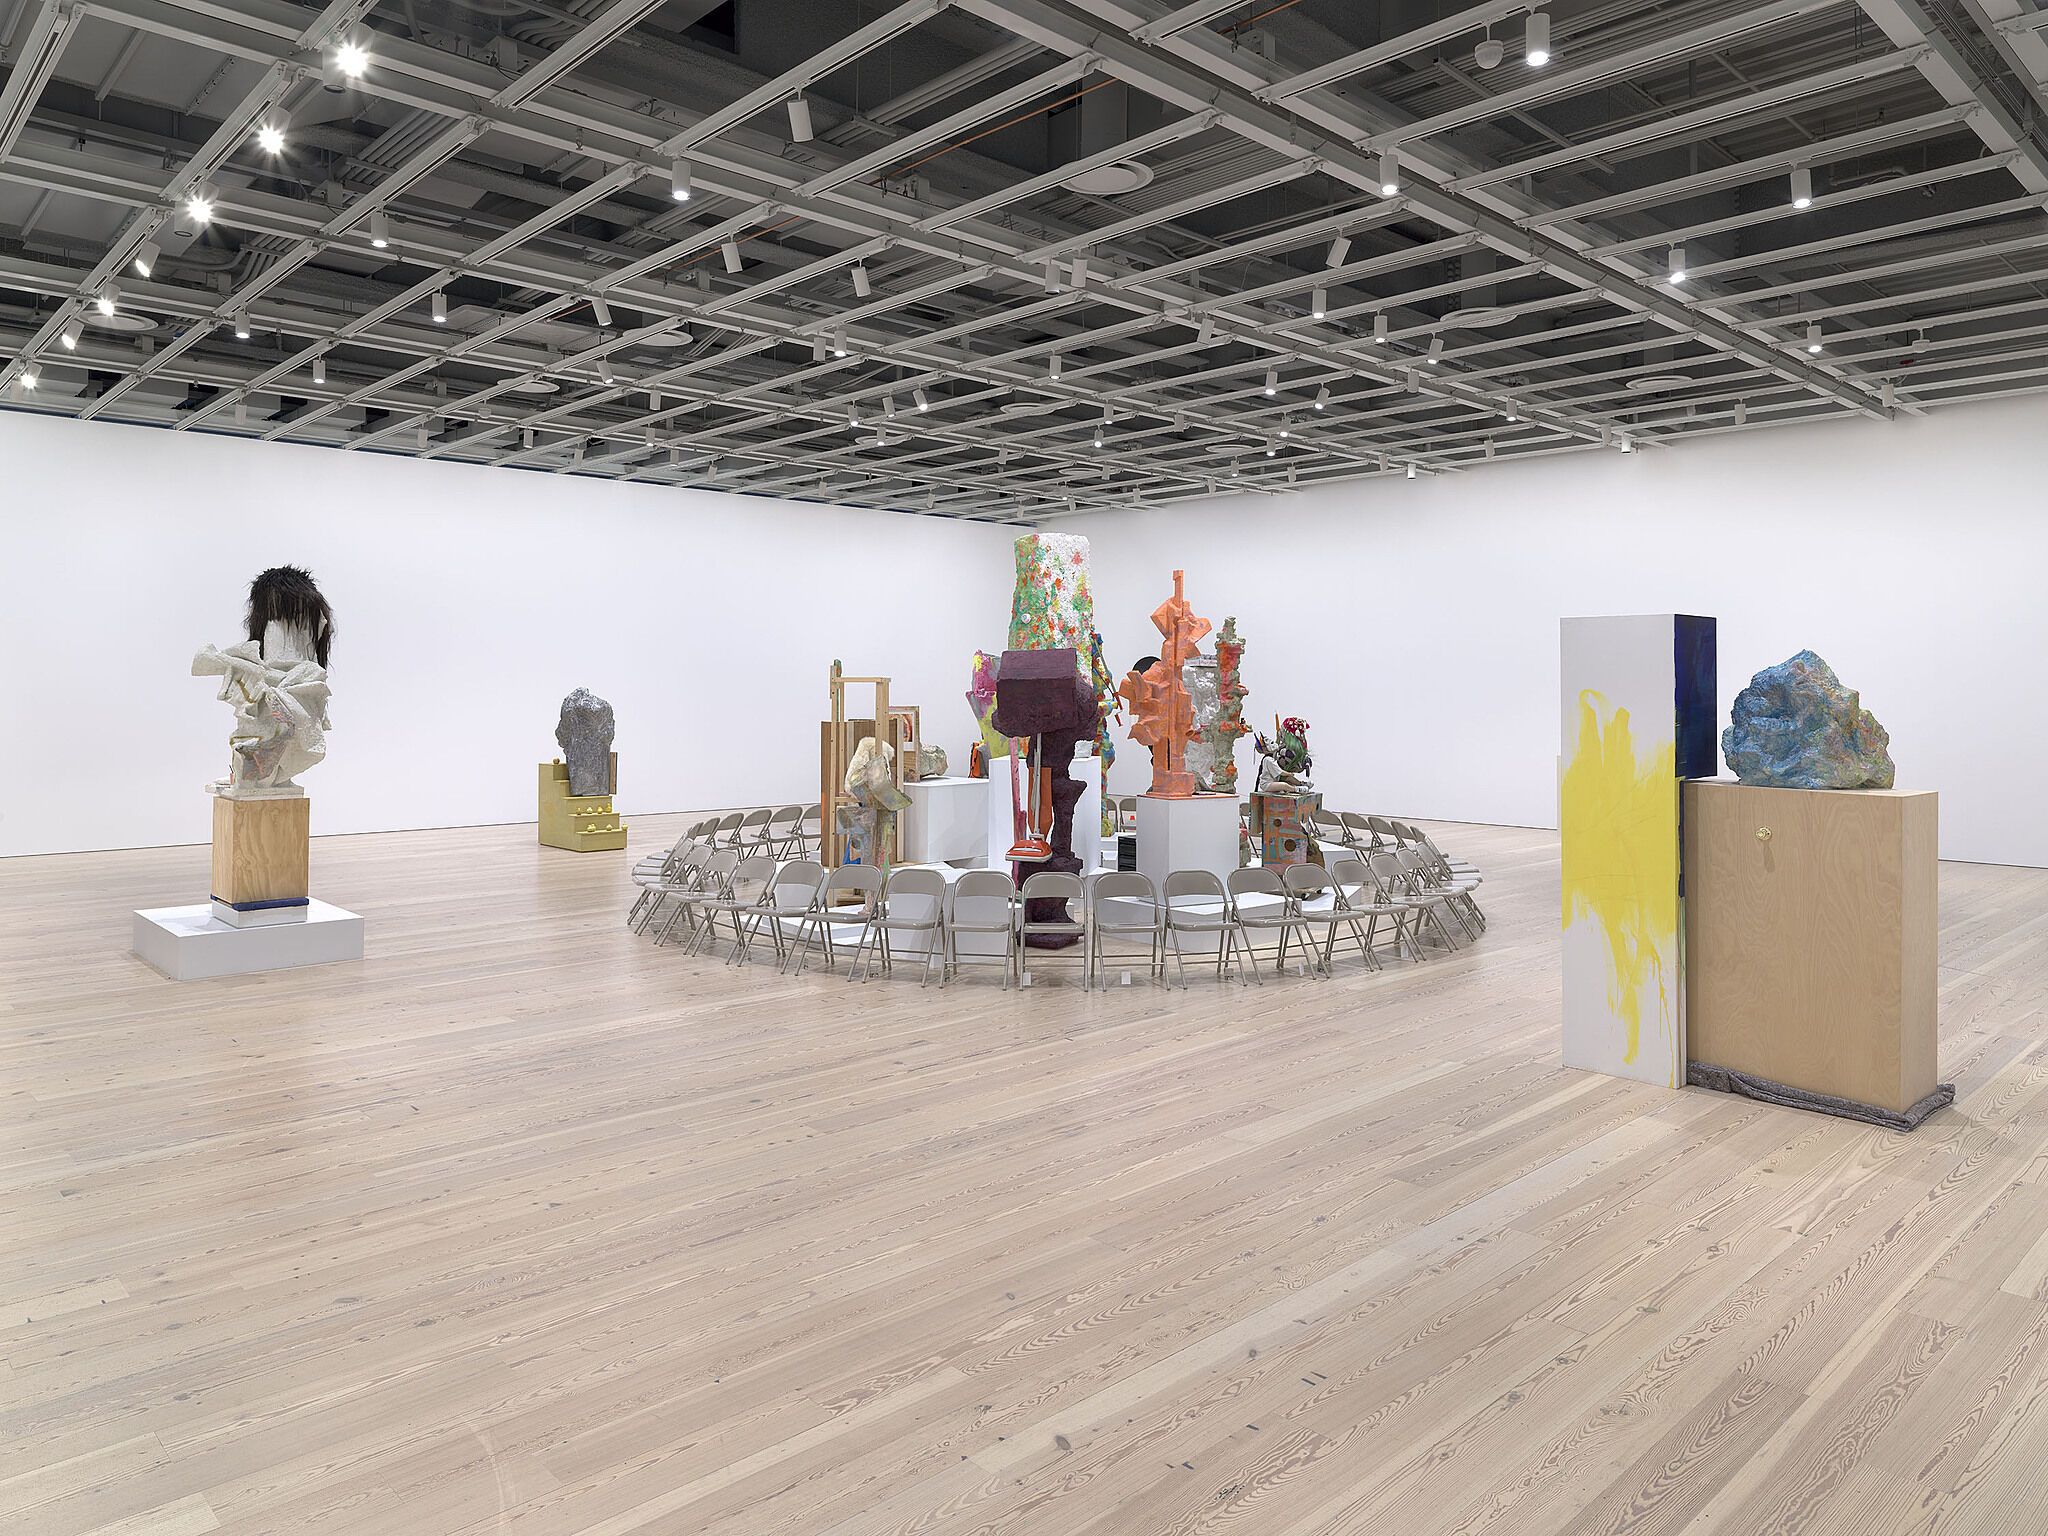 A ring of chairs surround various sculptures in a gallery.